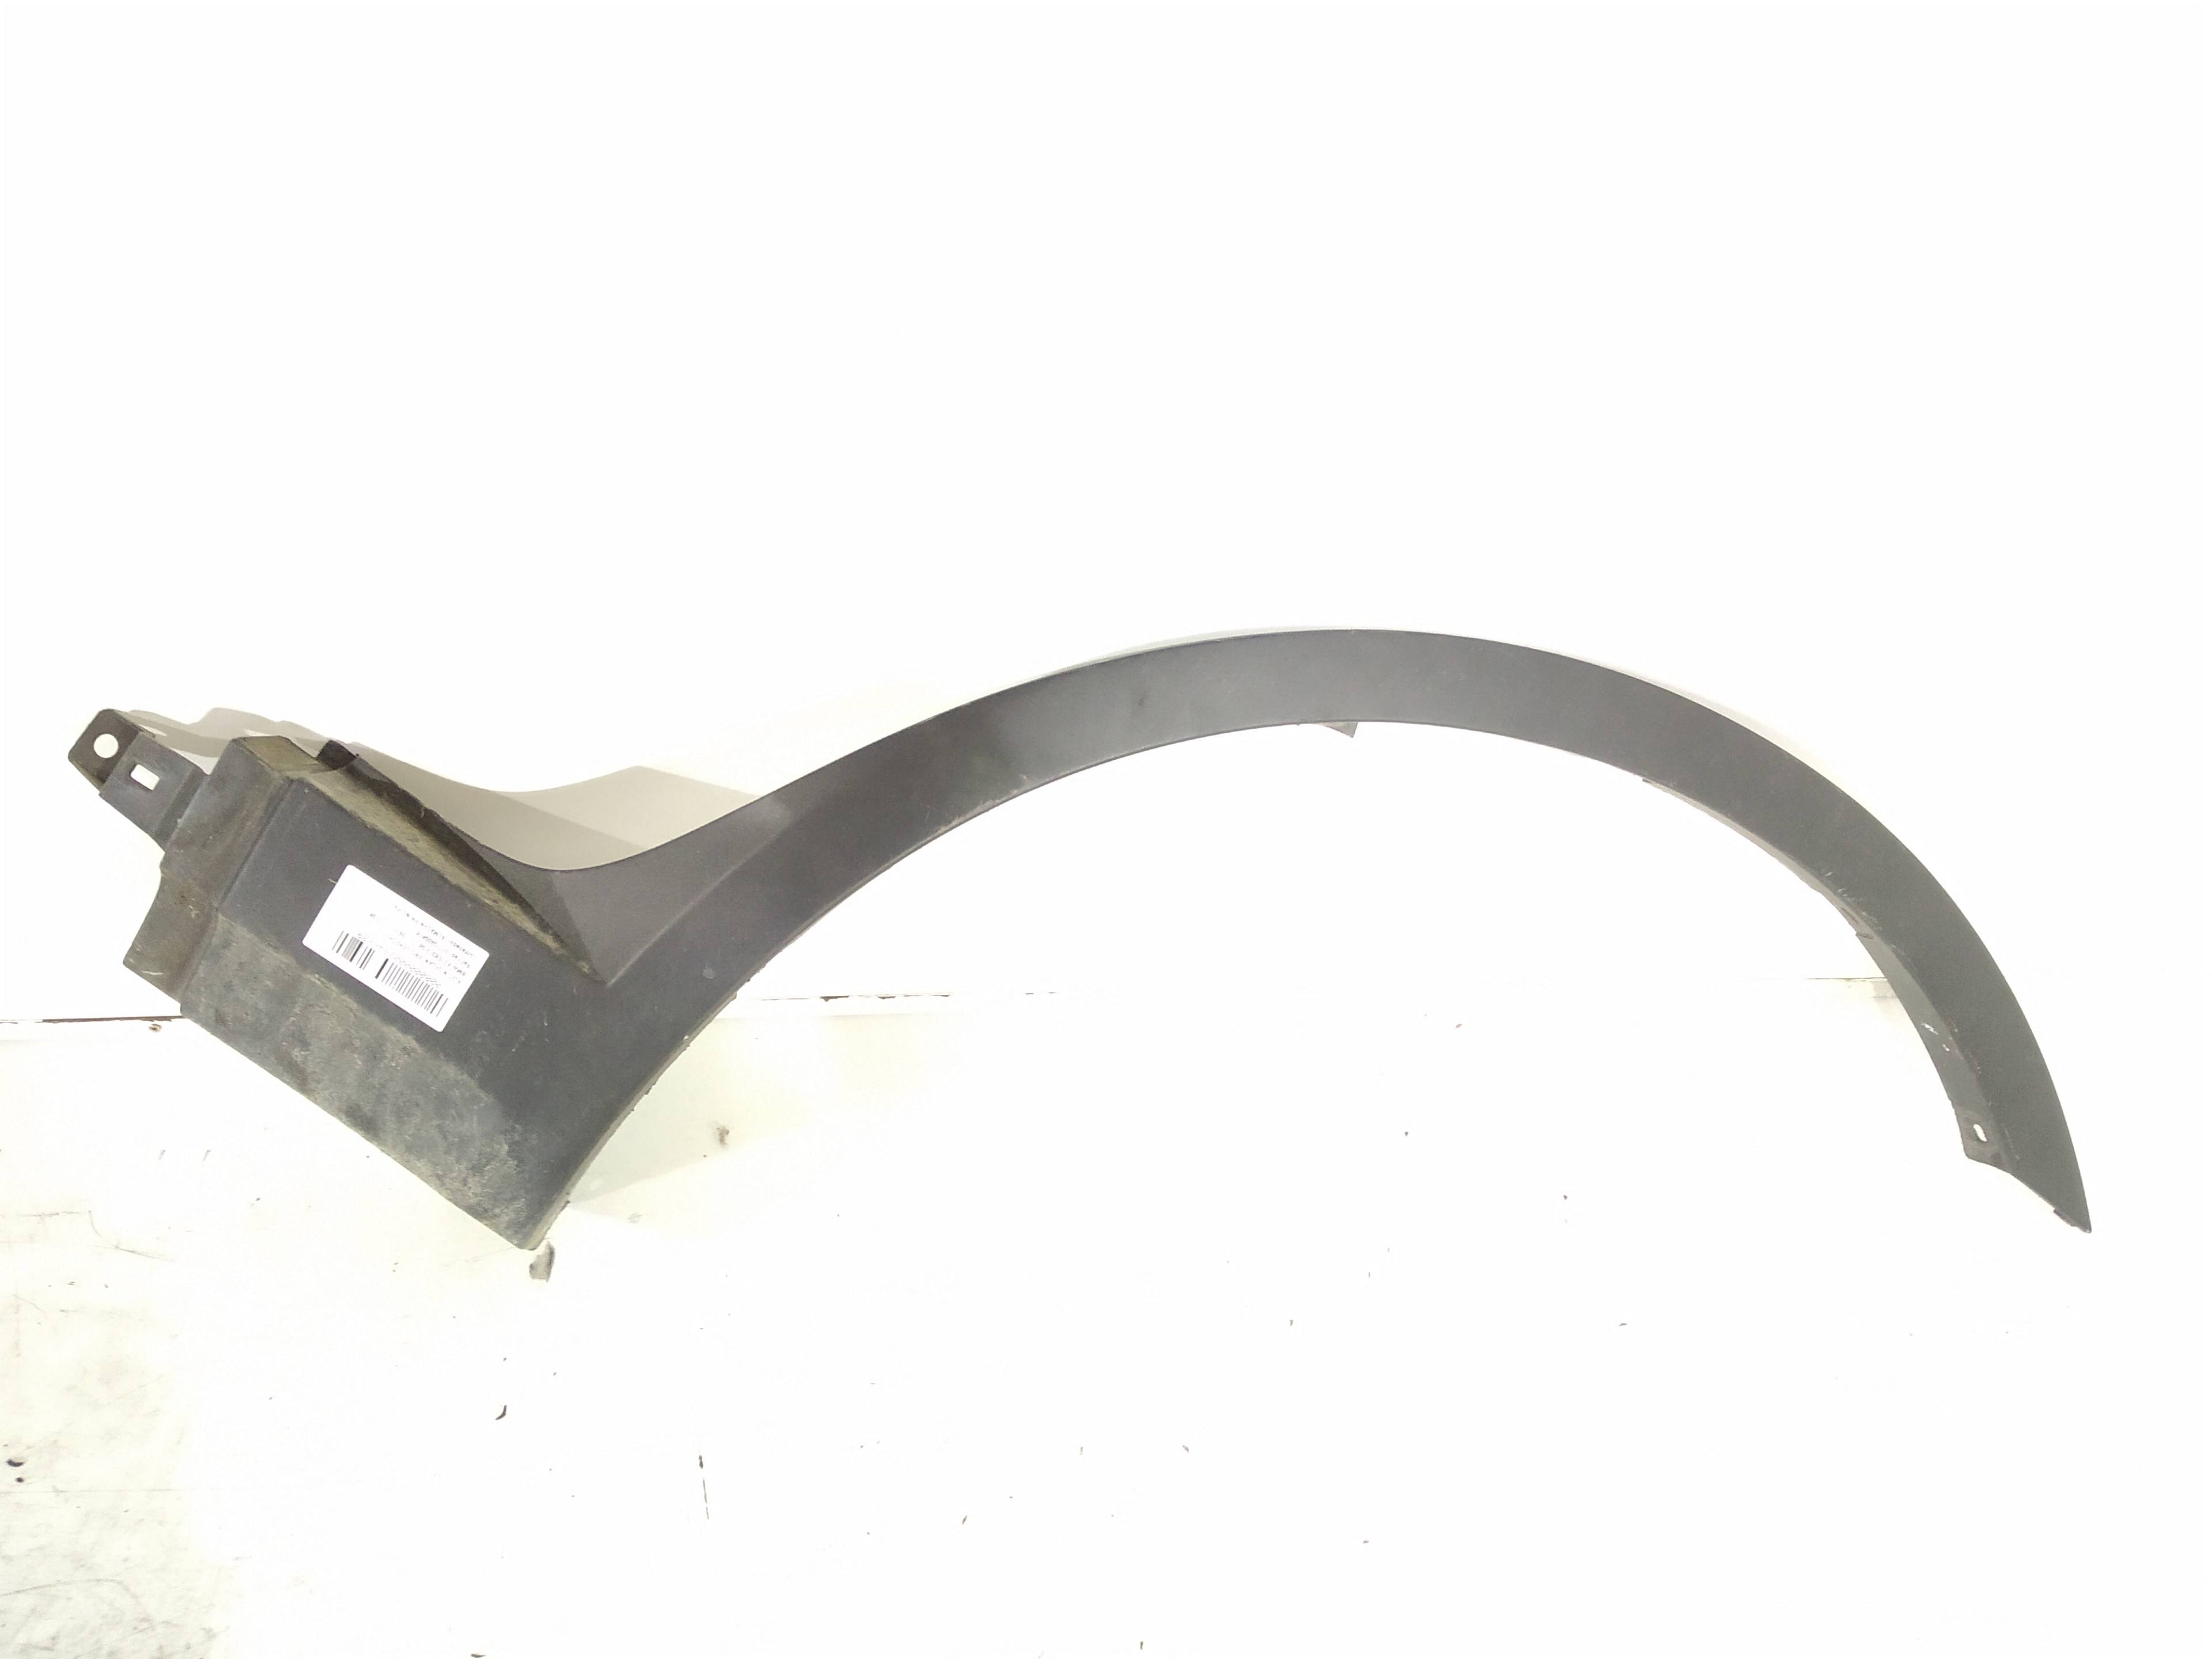 BMW X3 E83 (2003-2010) Front Right Fender Molding 51773405818, 51773405818, 51773405818 19334603